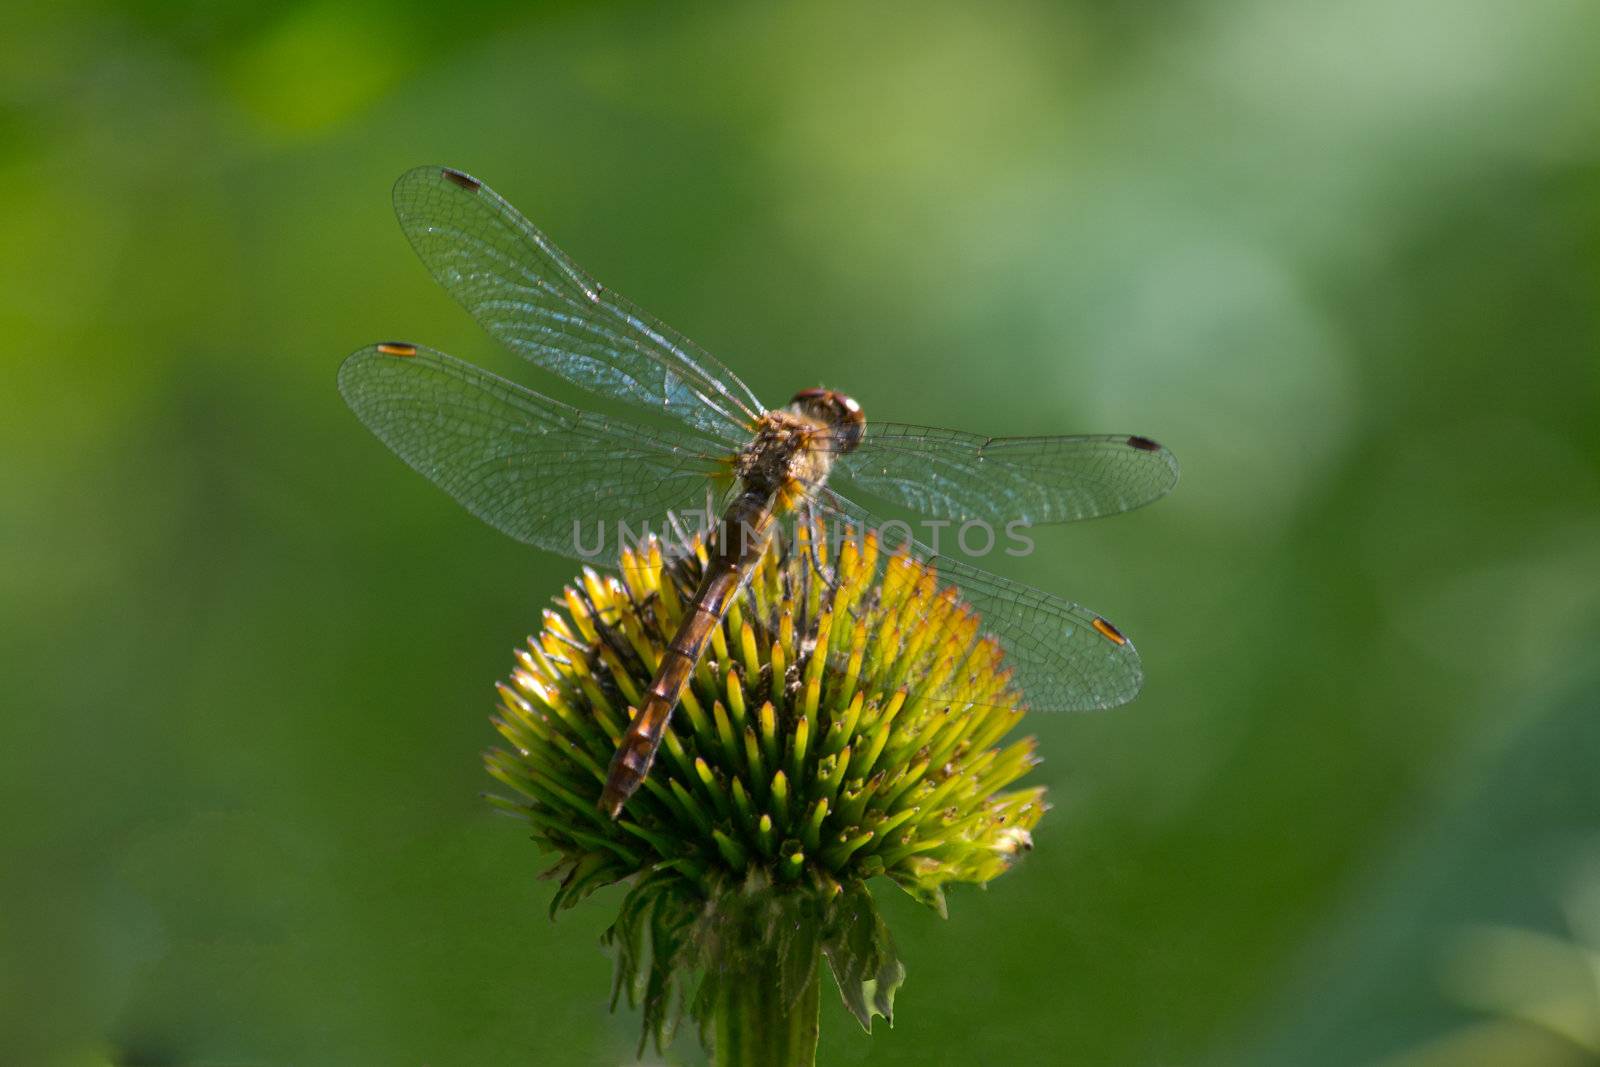 The dragonfly perched patiently atop the flower, waiting for the chance to catch a meal.